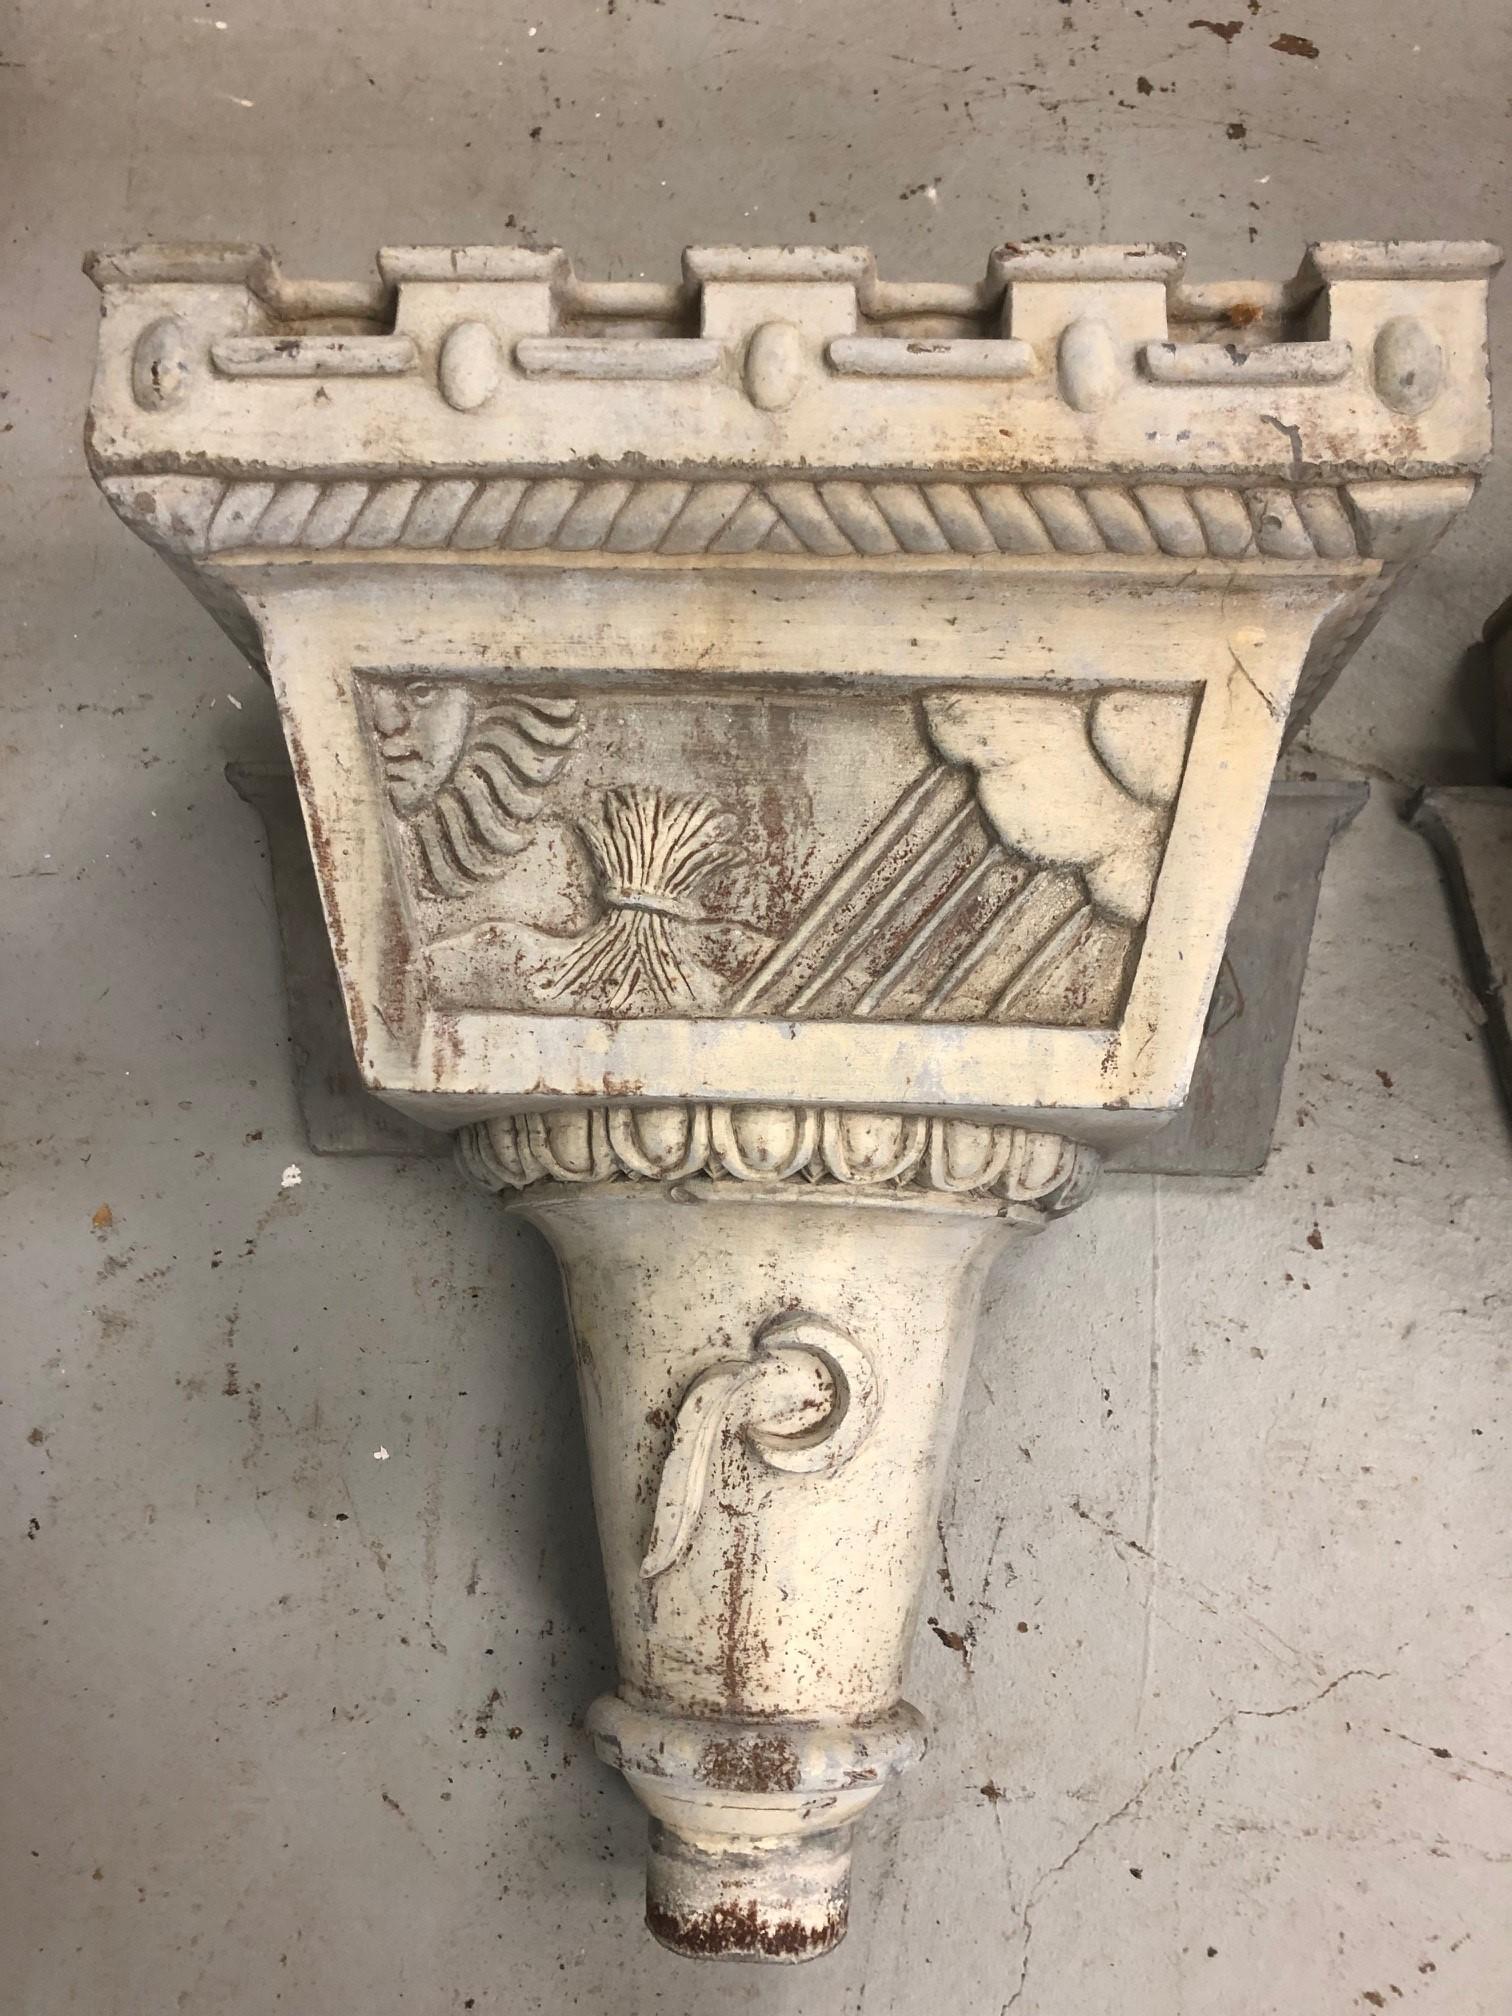 Antique Late 19th Century Lead Downspouts or Rain Hoppers from a Greenwich Ct. Estate. This is a great pair of lead downspouts with a image of sunshine, rain, and a bushel of wheat originally from a Manor House in England. This pair would be perfect